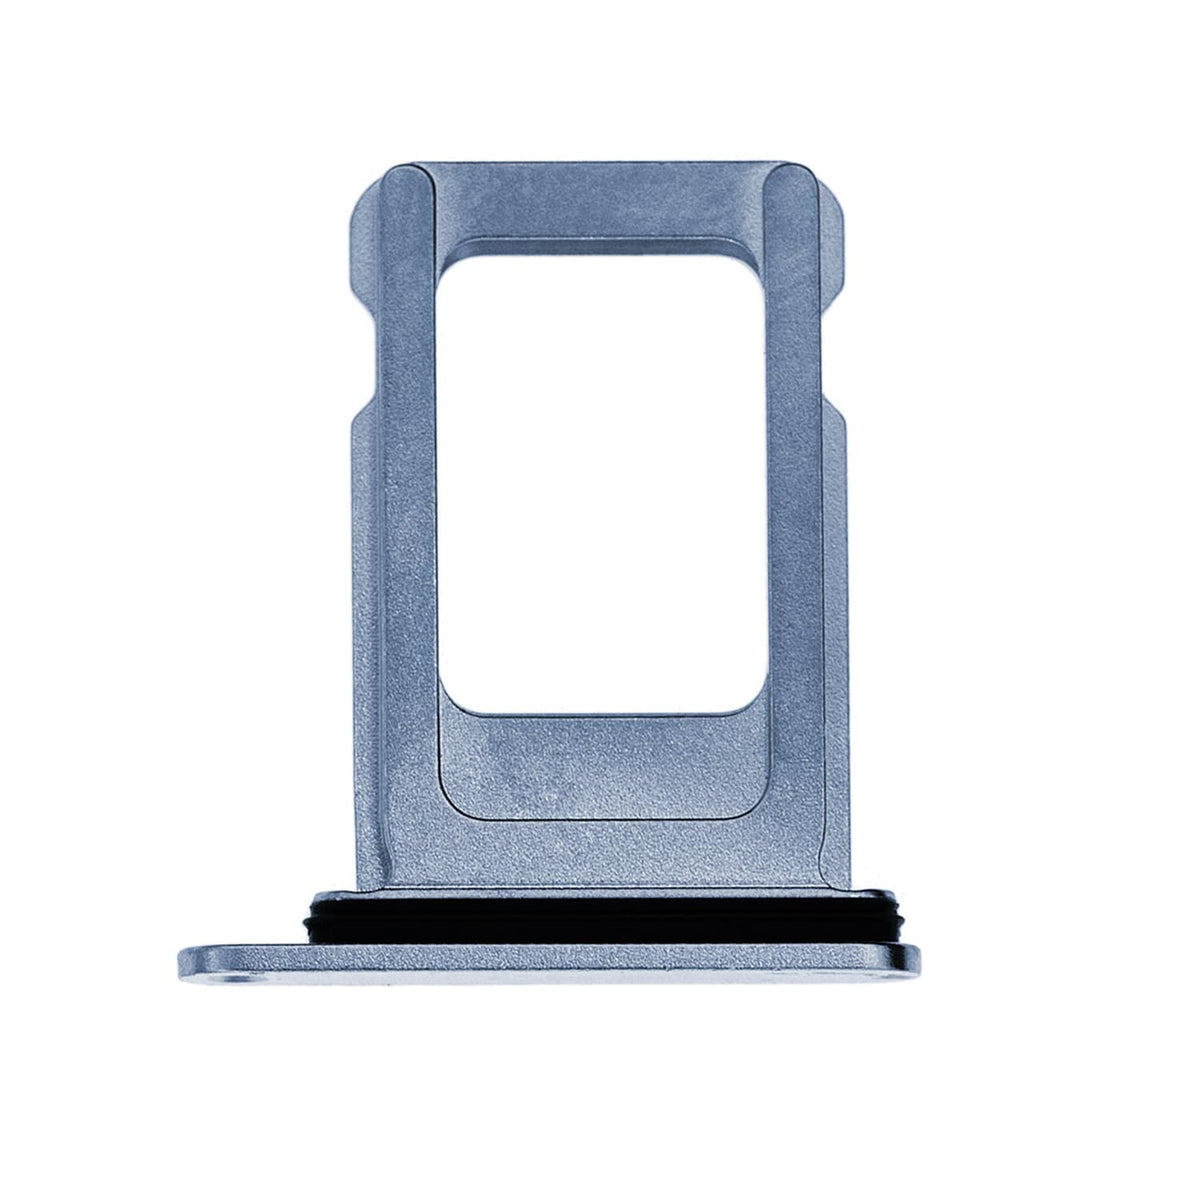 SINGLE SIM CARD TRAY FOR IPHONE 13 PRO/13 PRO MAX  - SIERRA BLUE